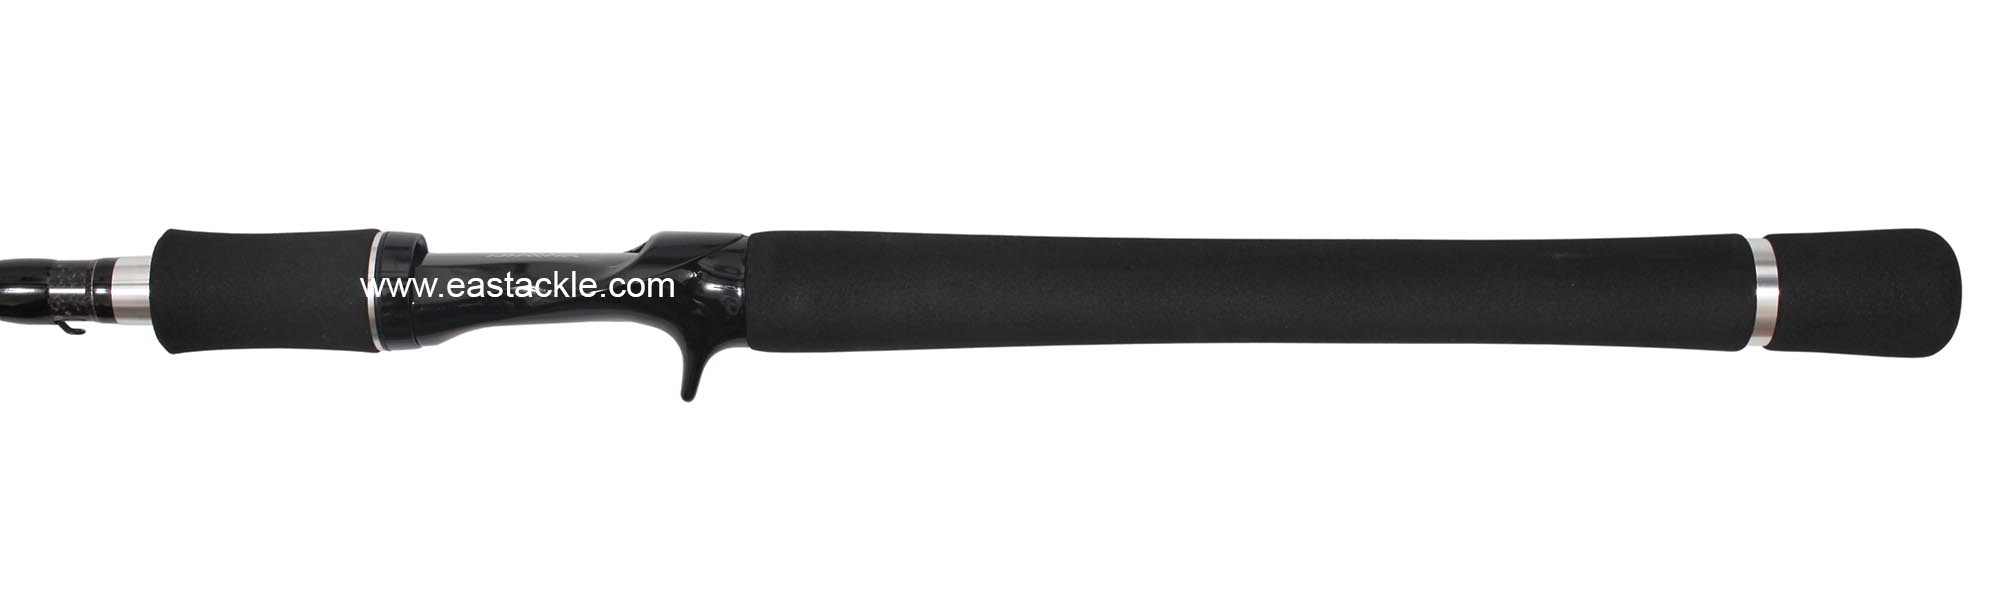 Daiwa - Black Label 701XXHB - Bait Casting Rod - Butt to Reel Seat (Side View) | Eastackle